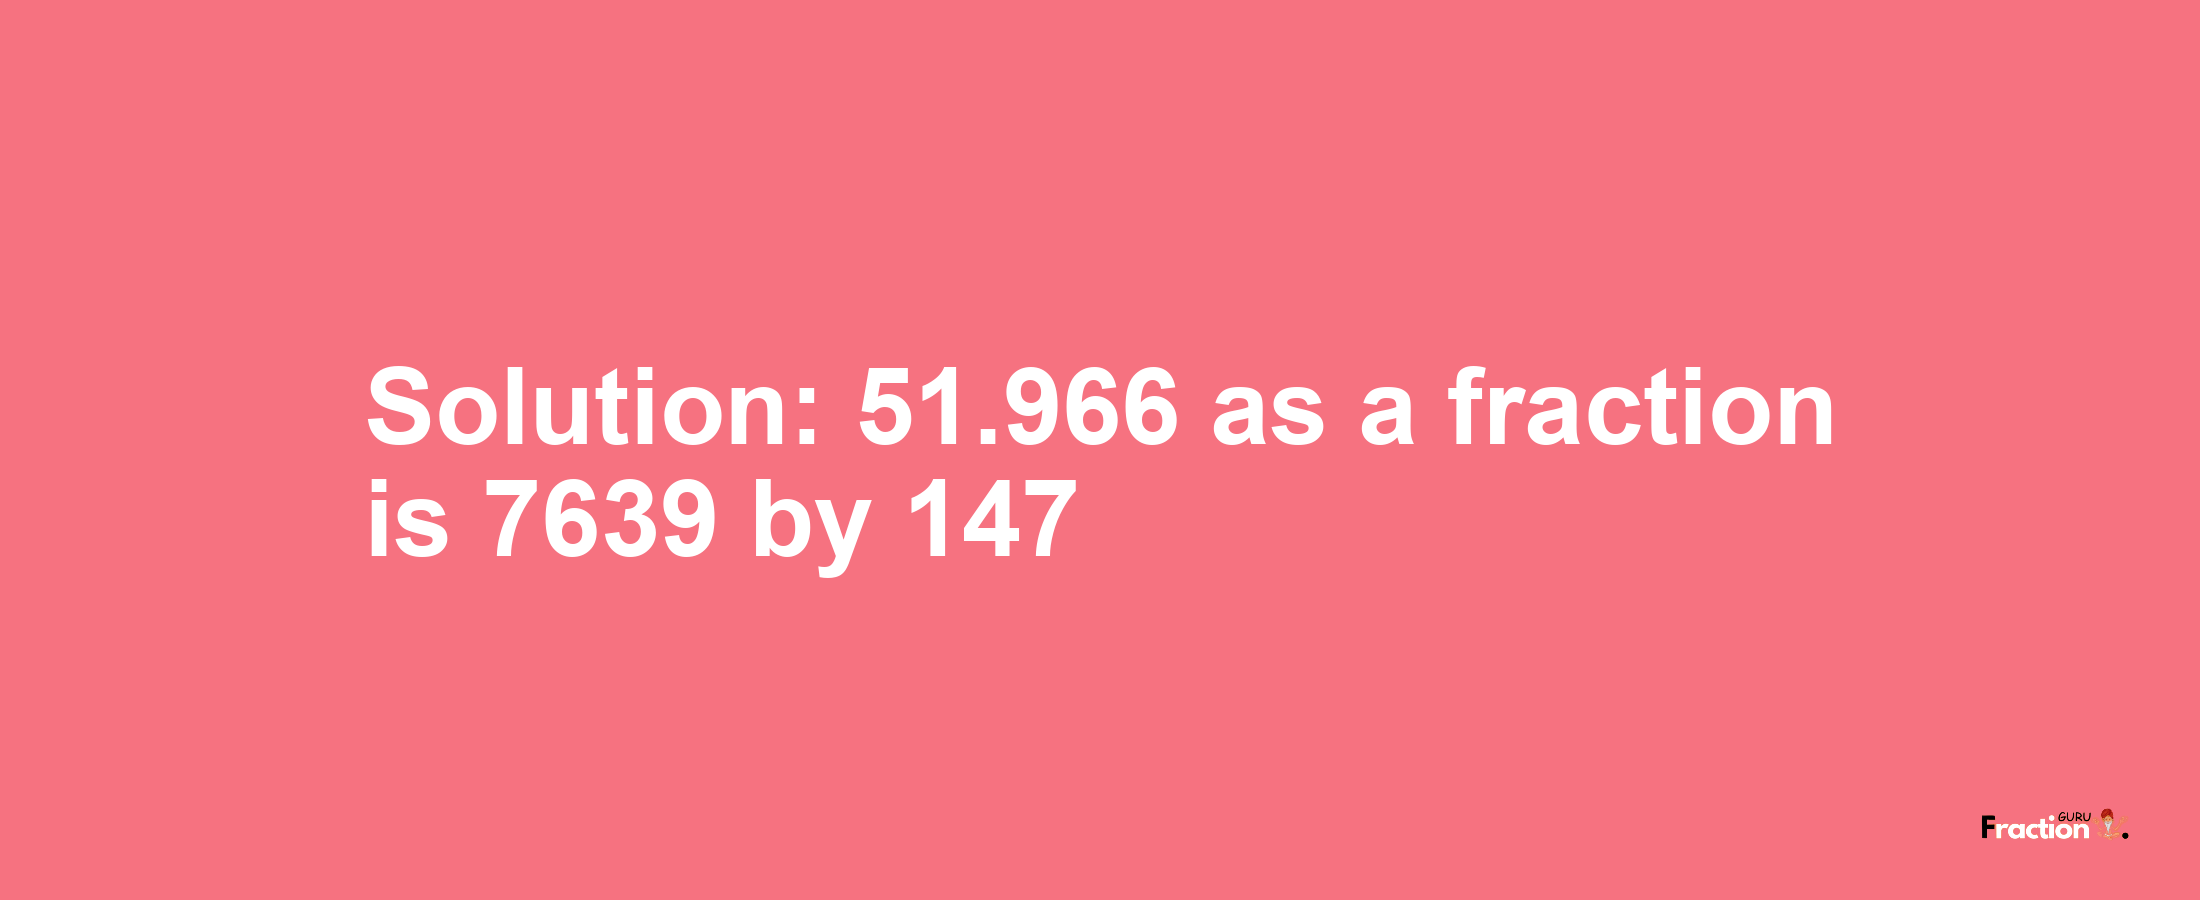 Solution:51.966 as a fraction is 7639/147